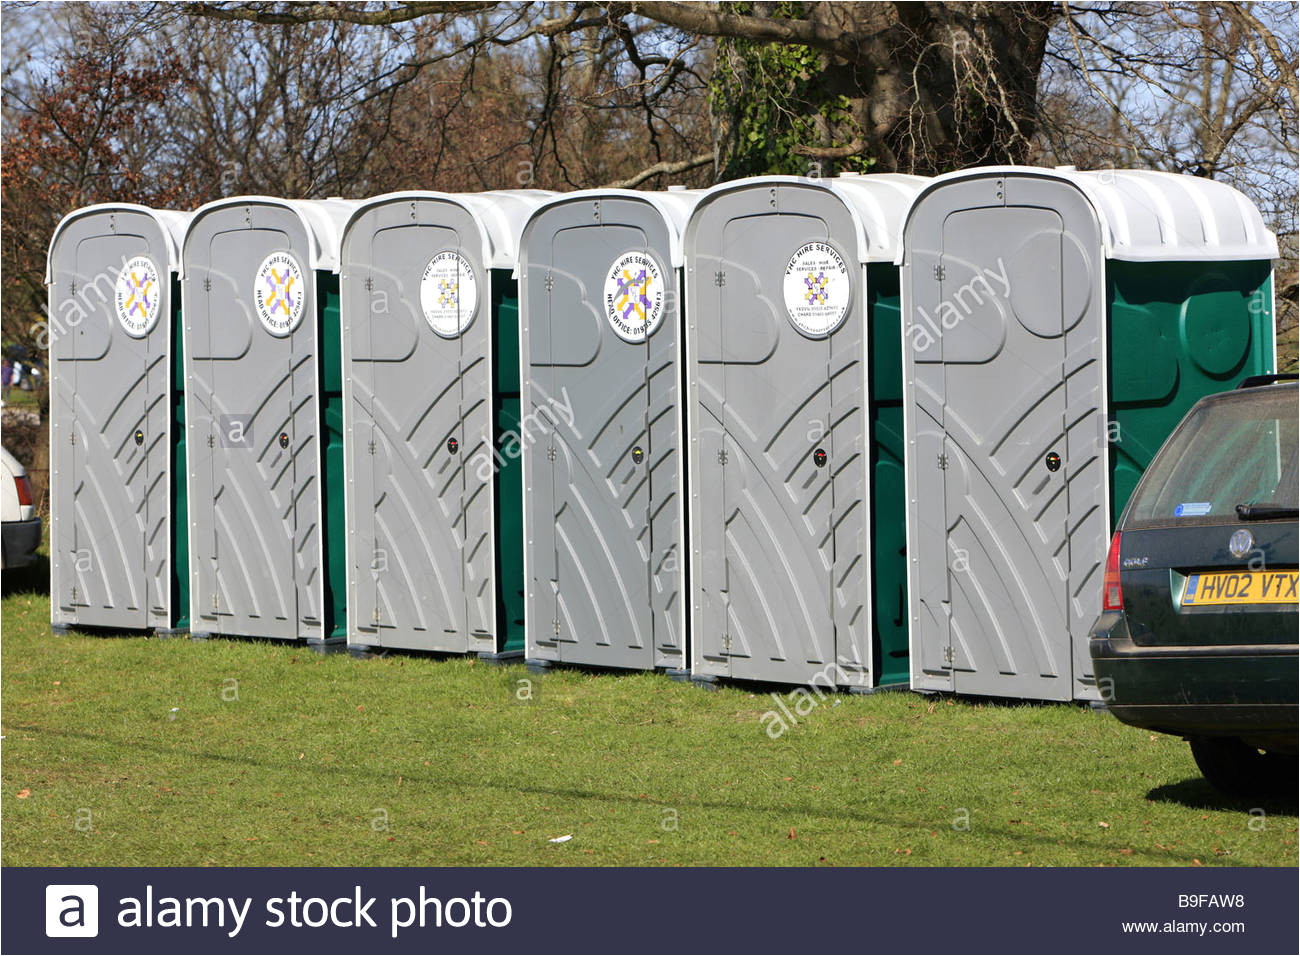 a row of portable loos or portapotty toilets at an outside event stock image